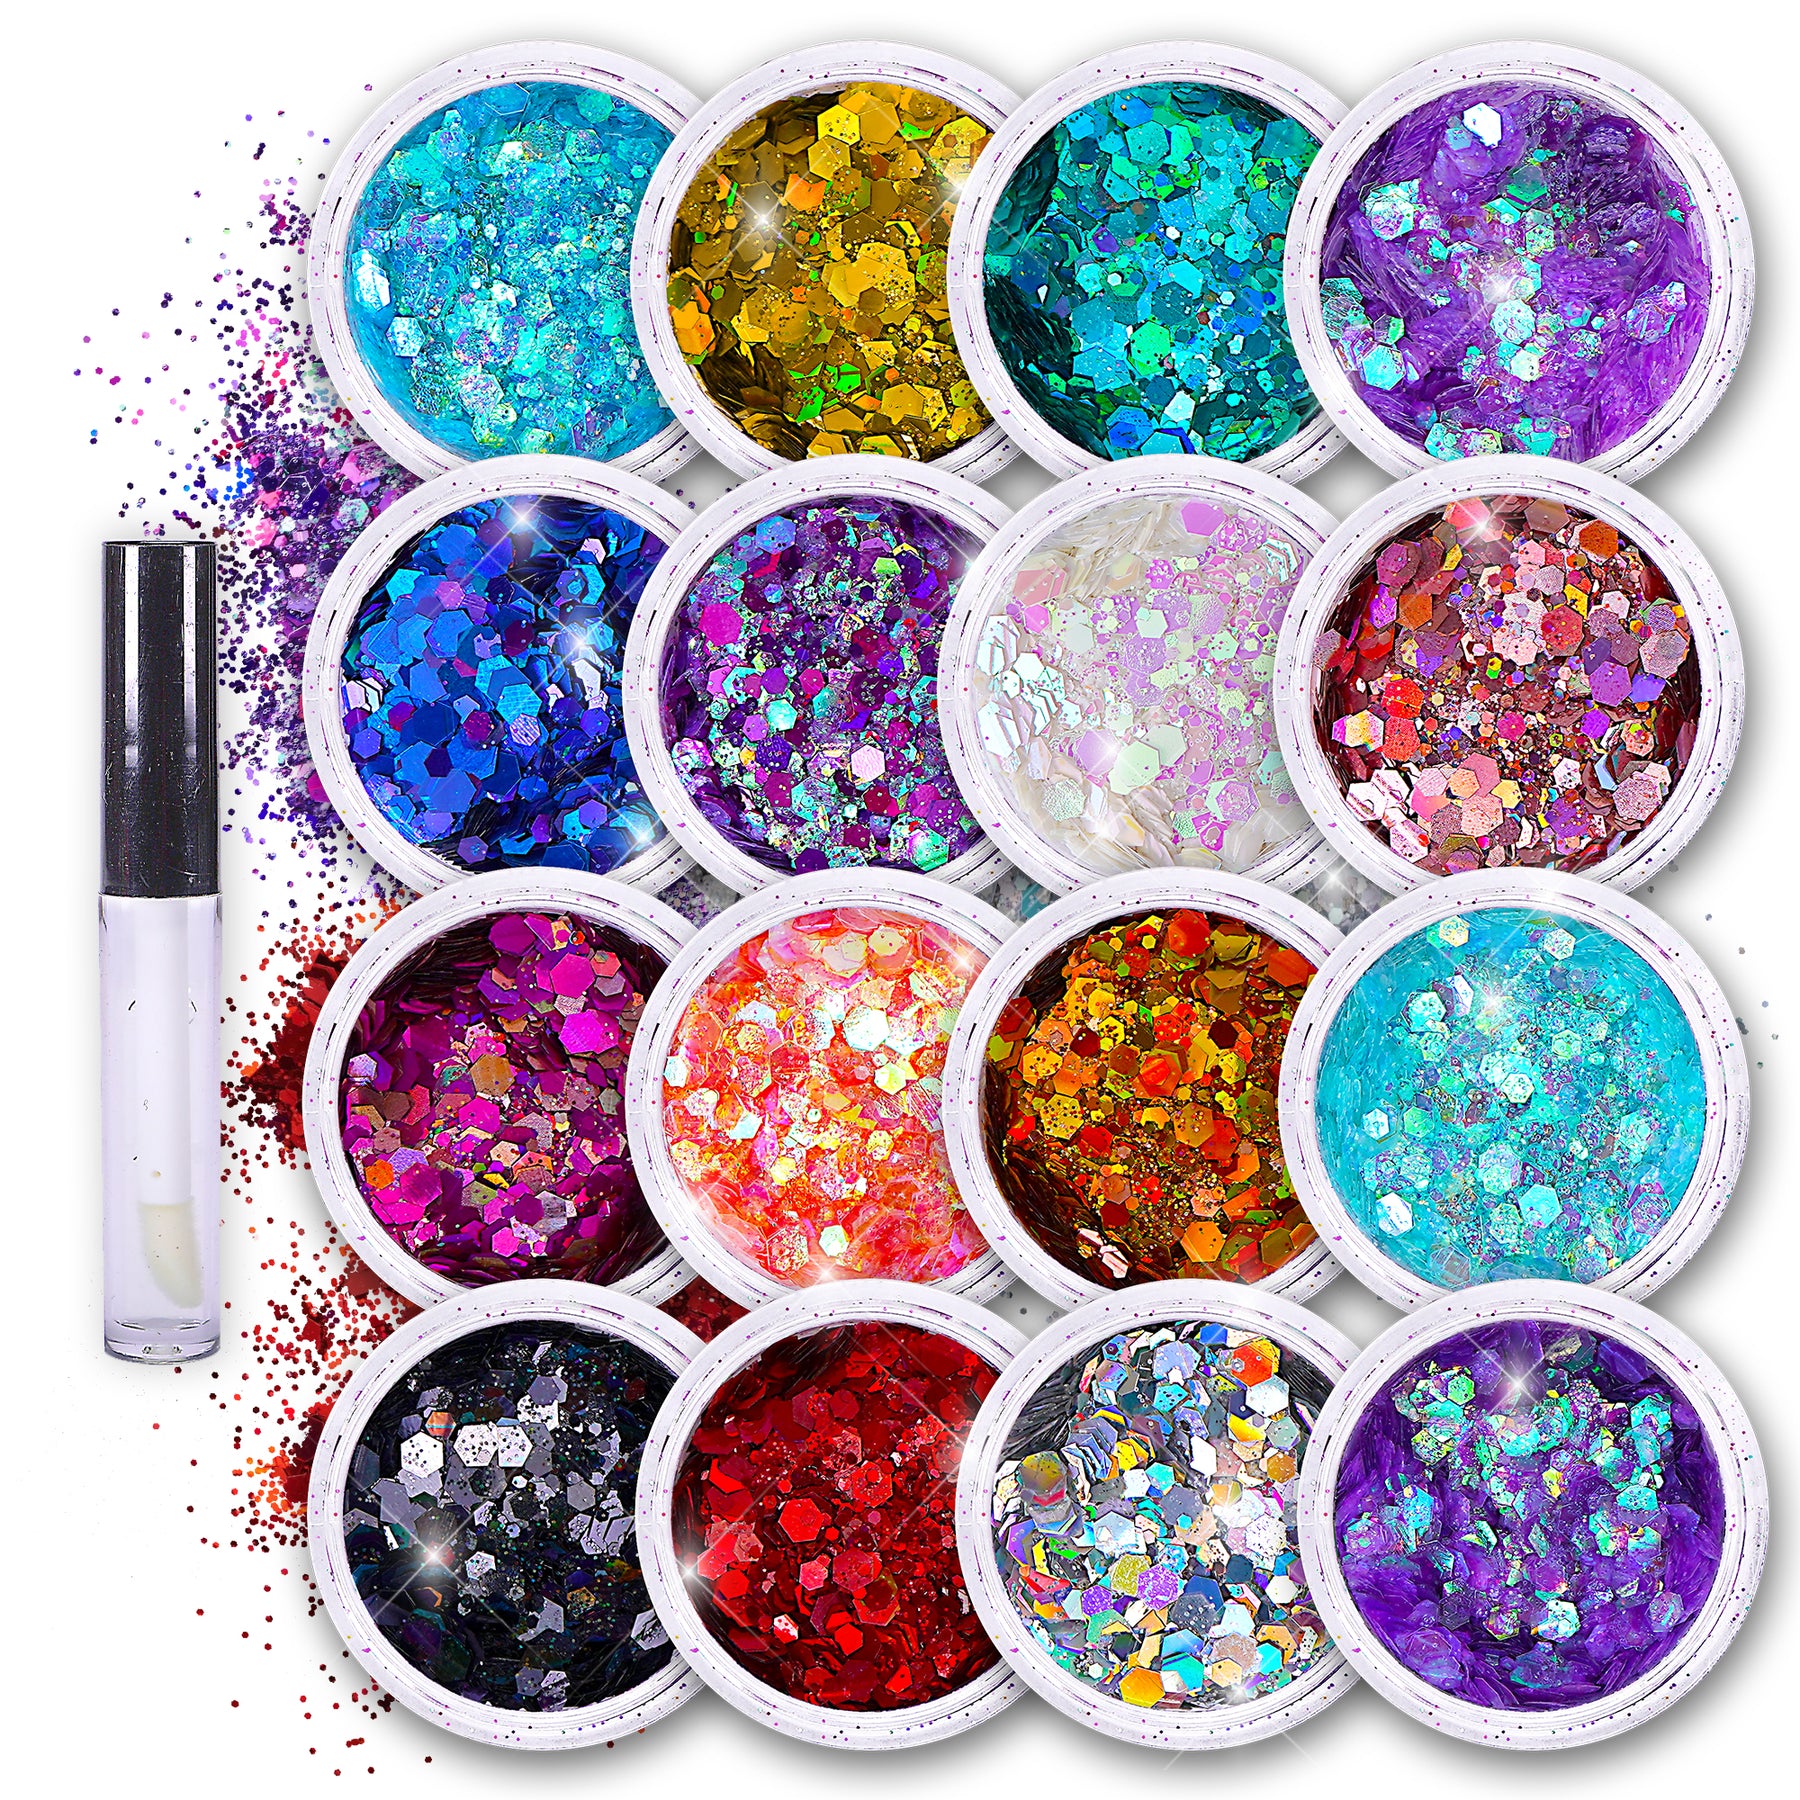 OXO: THE DUPE THE WORLD HAS BEEN WAITING FOR! – Glue glam Glitter